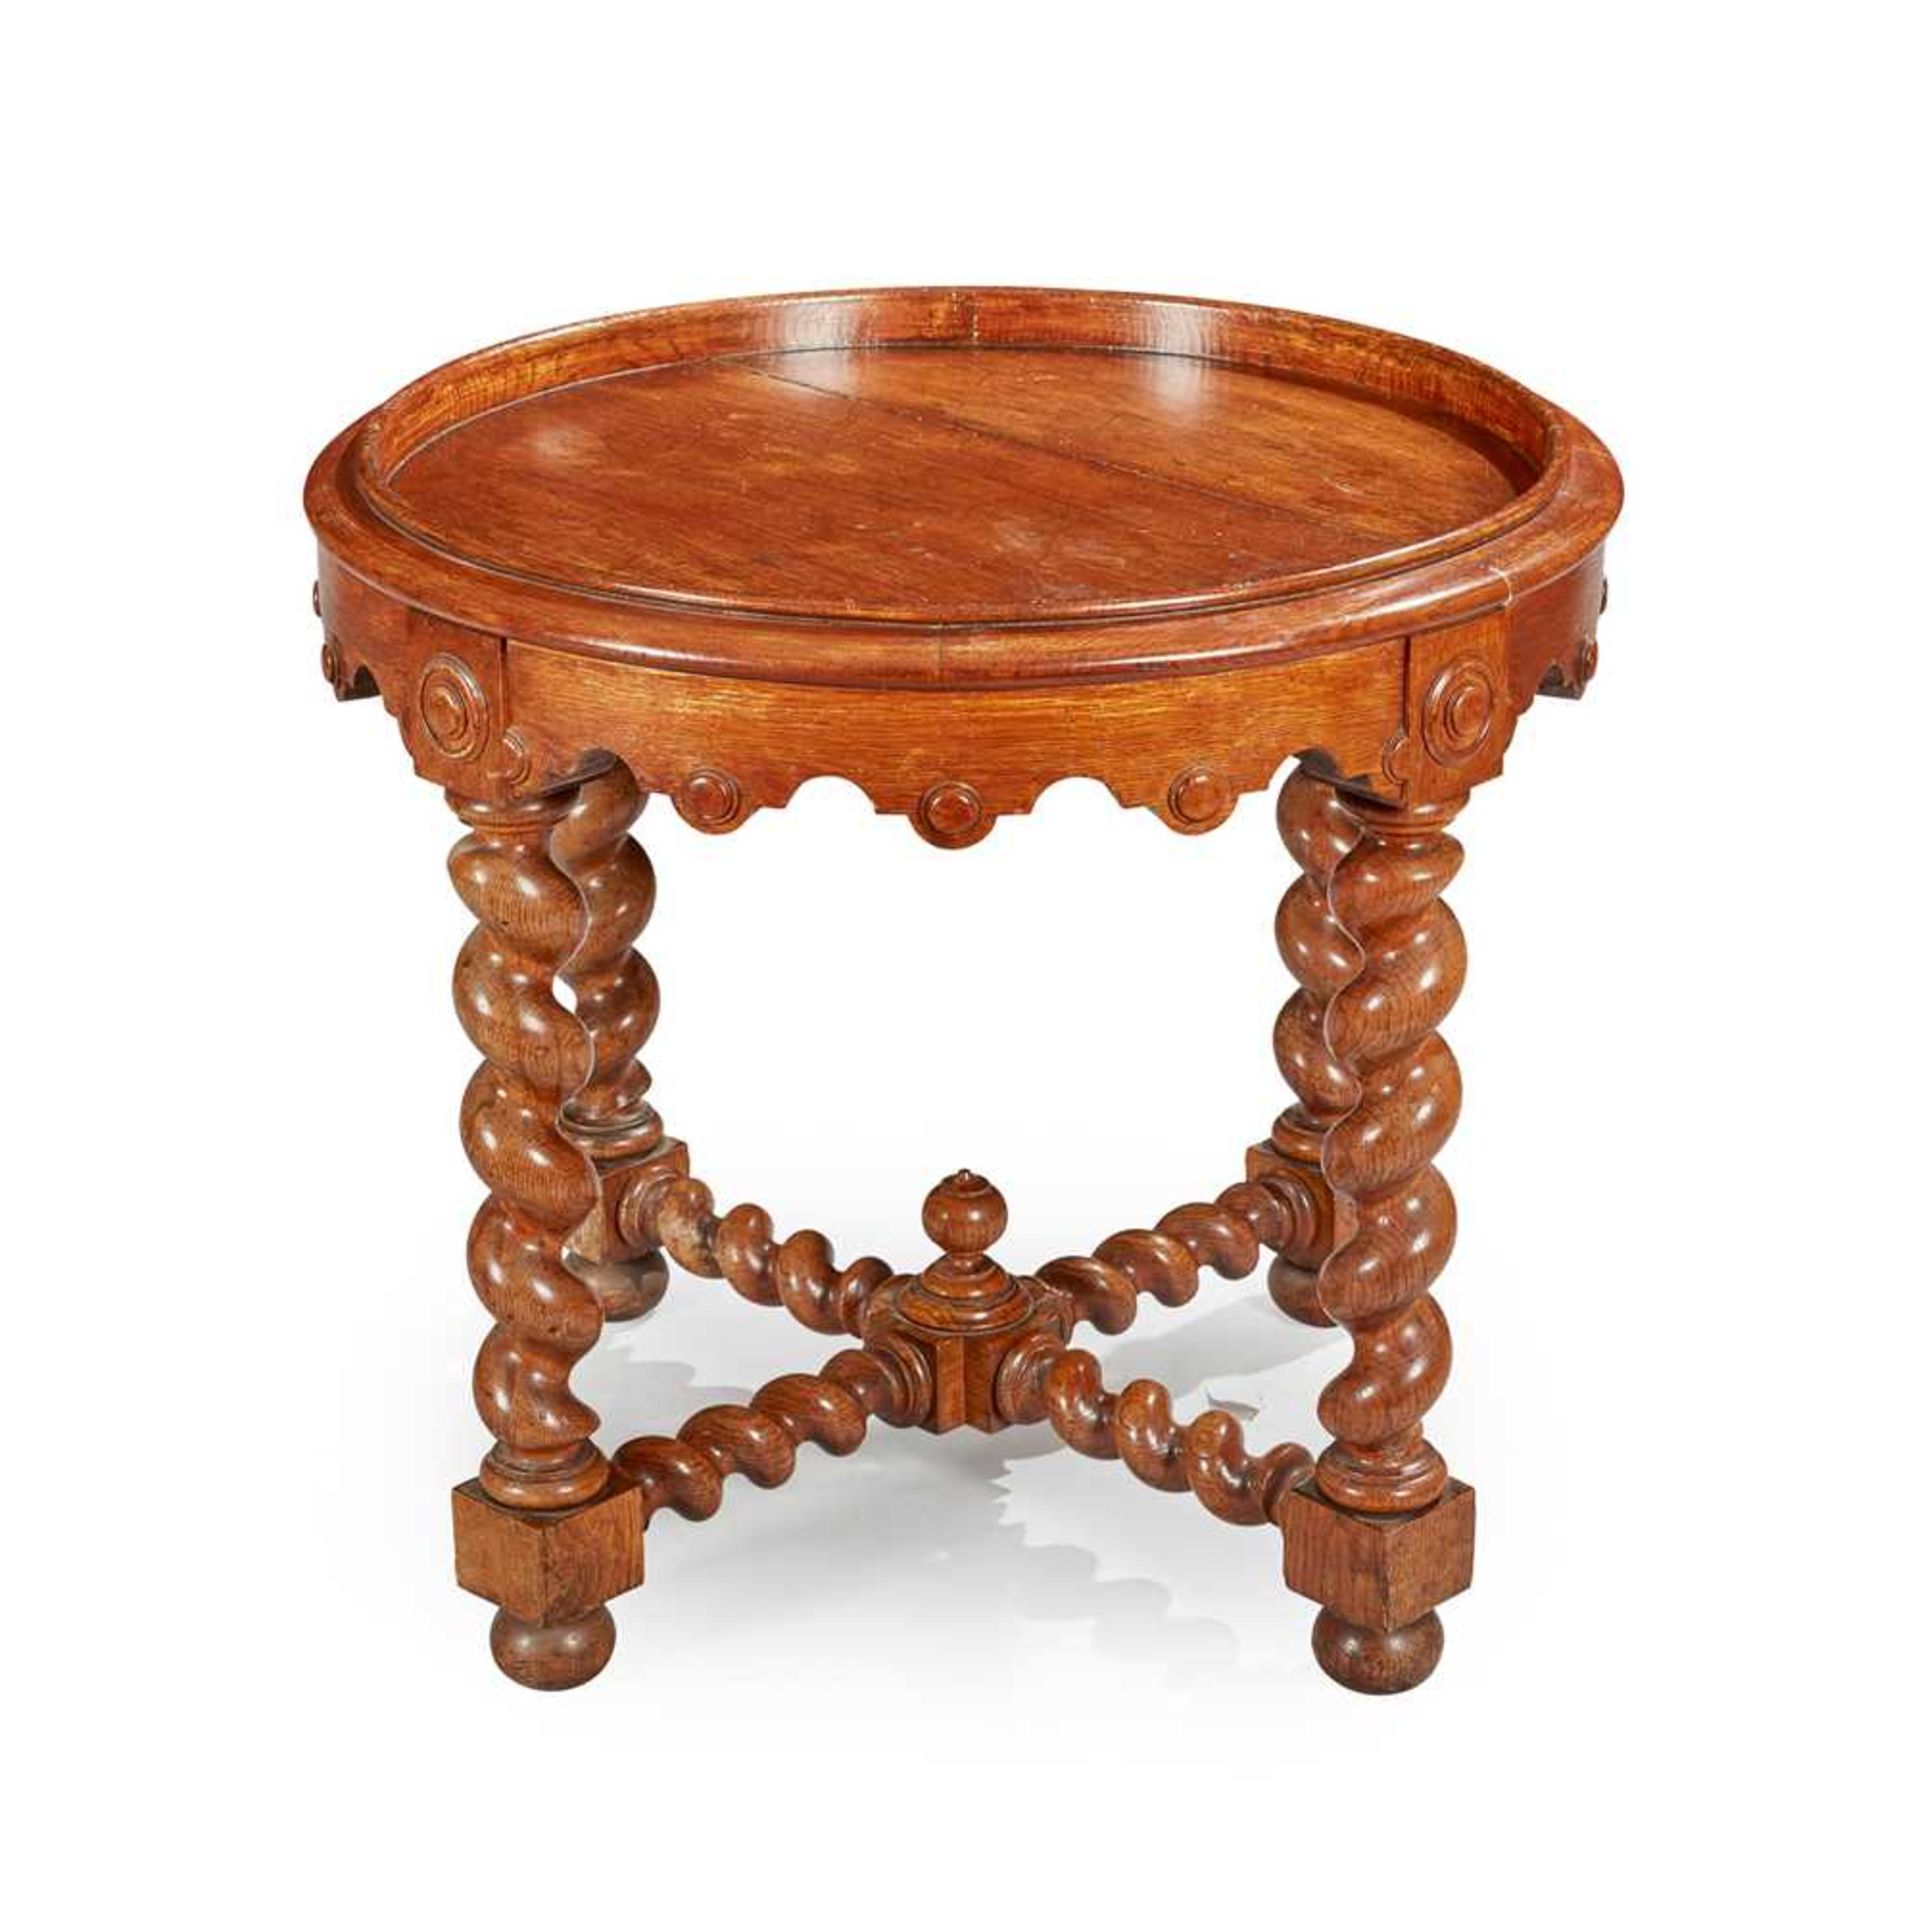 A JACOBEAN REVIVAL OAK OCCASIONAL TABLE EARLY 20TH CENTURY - Image 2 of 10